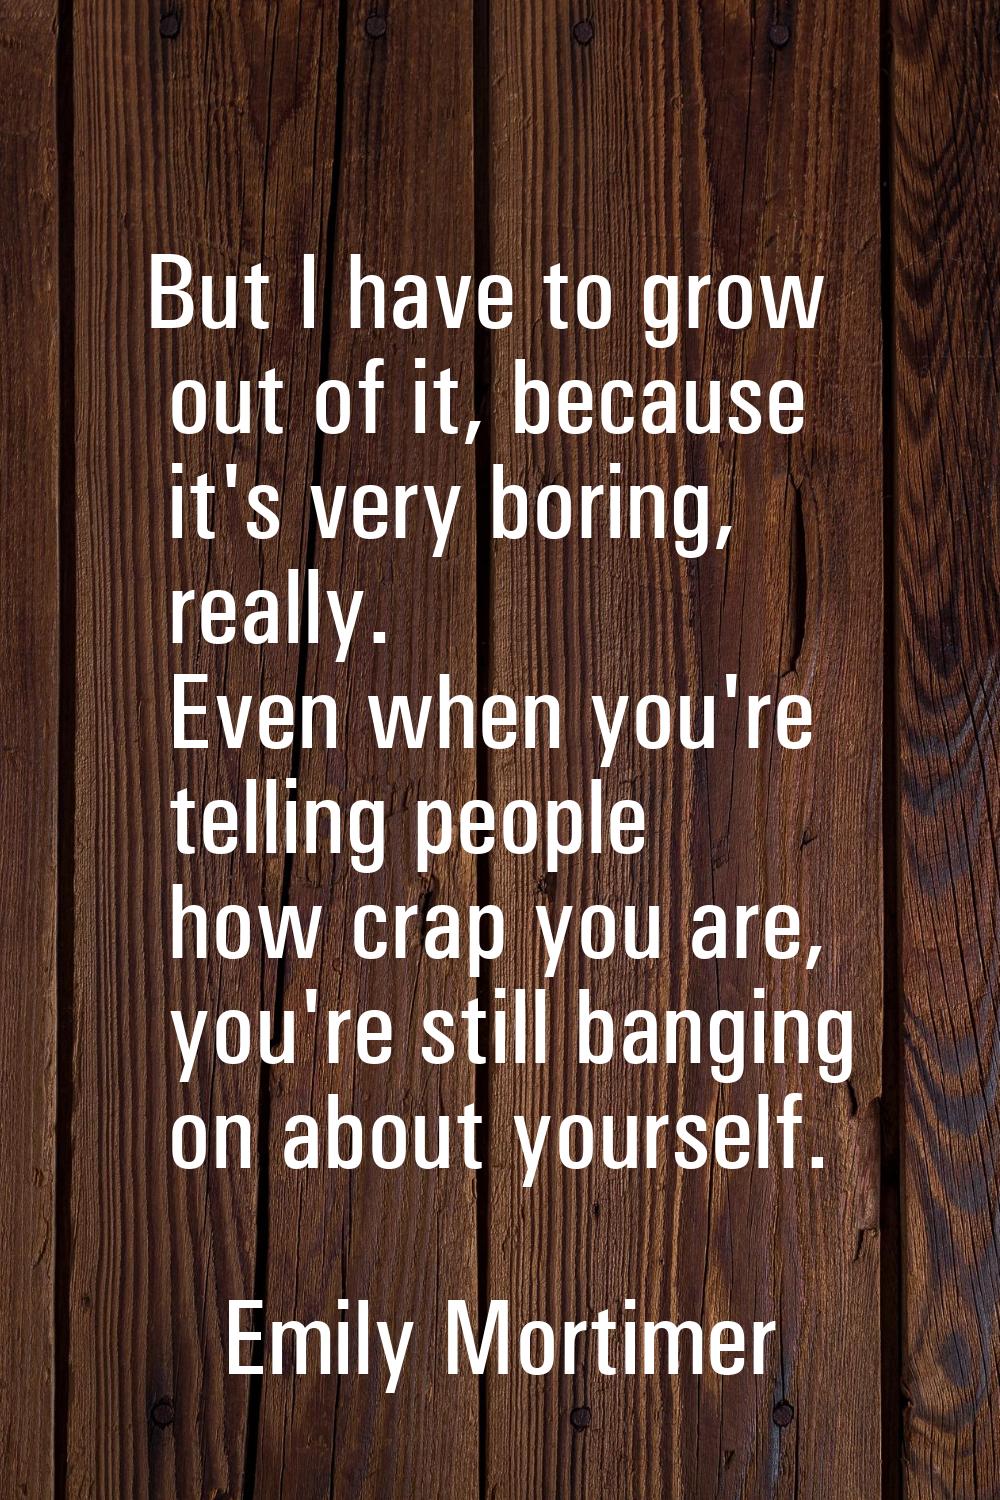 But I have to grow out of it, because it's very boring, really. Even when you're telling people how